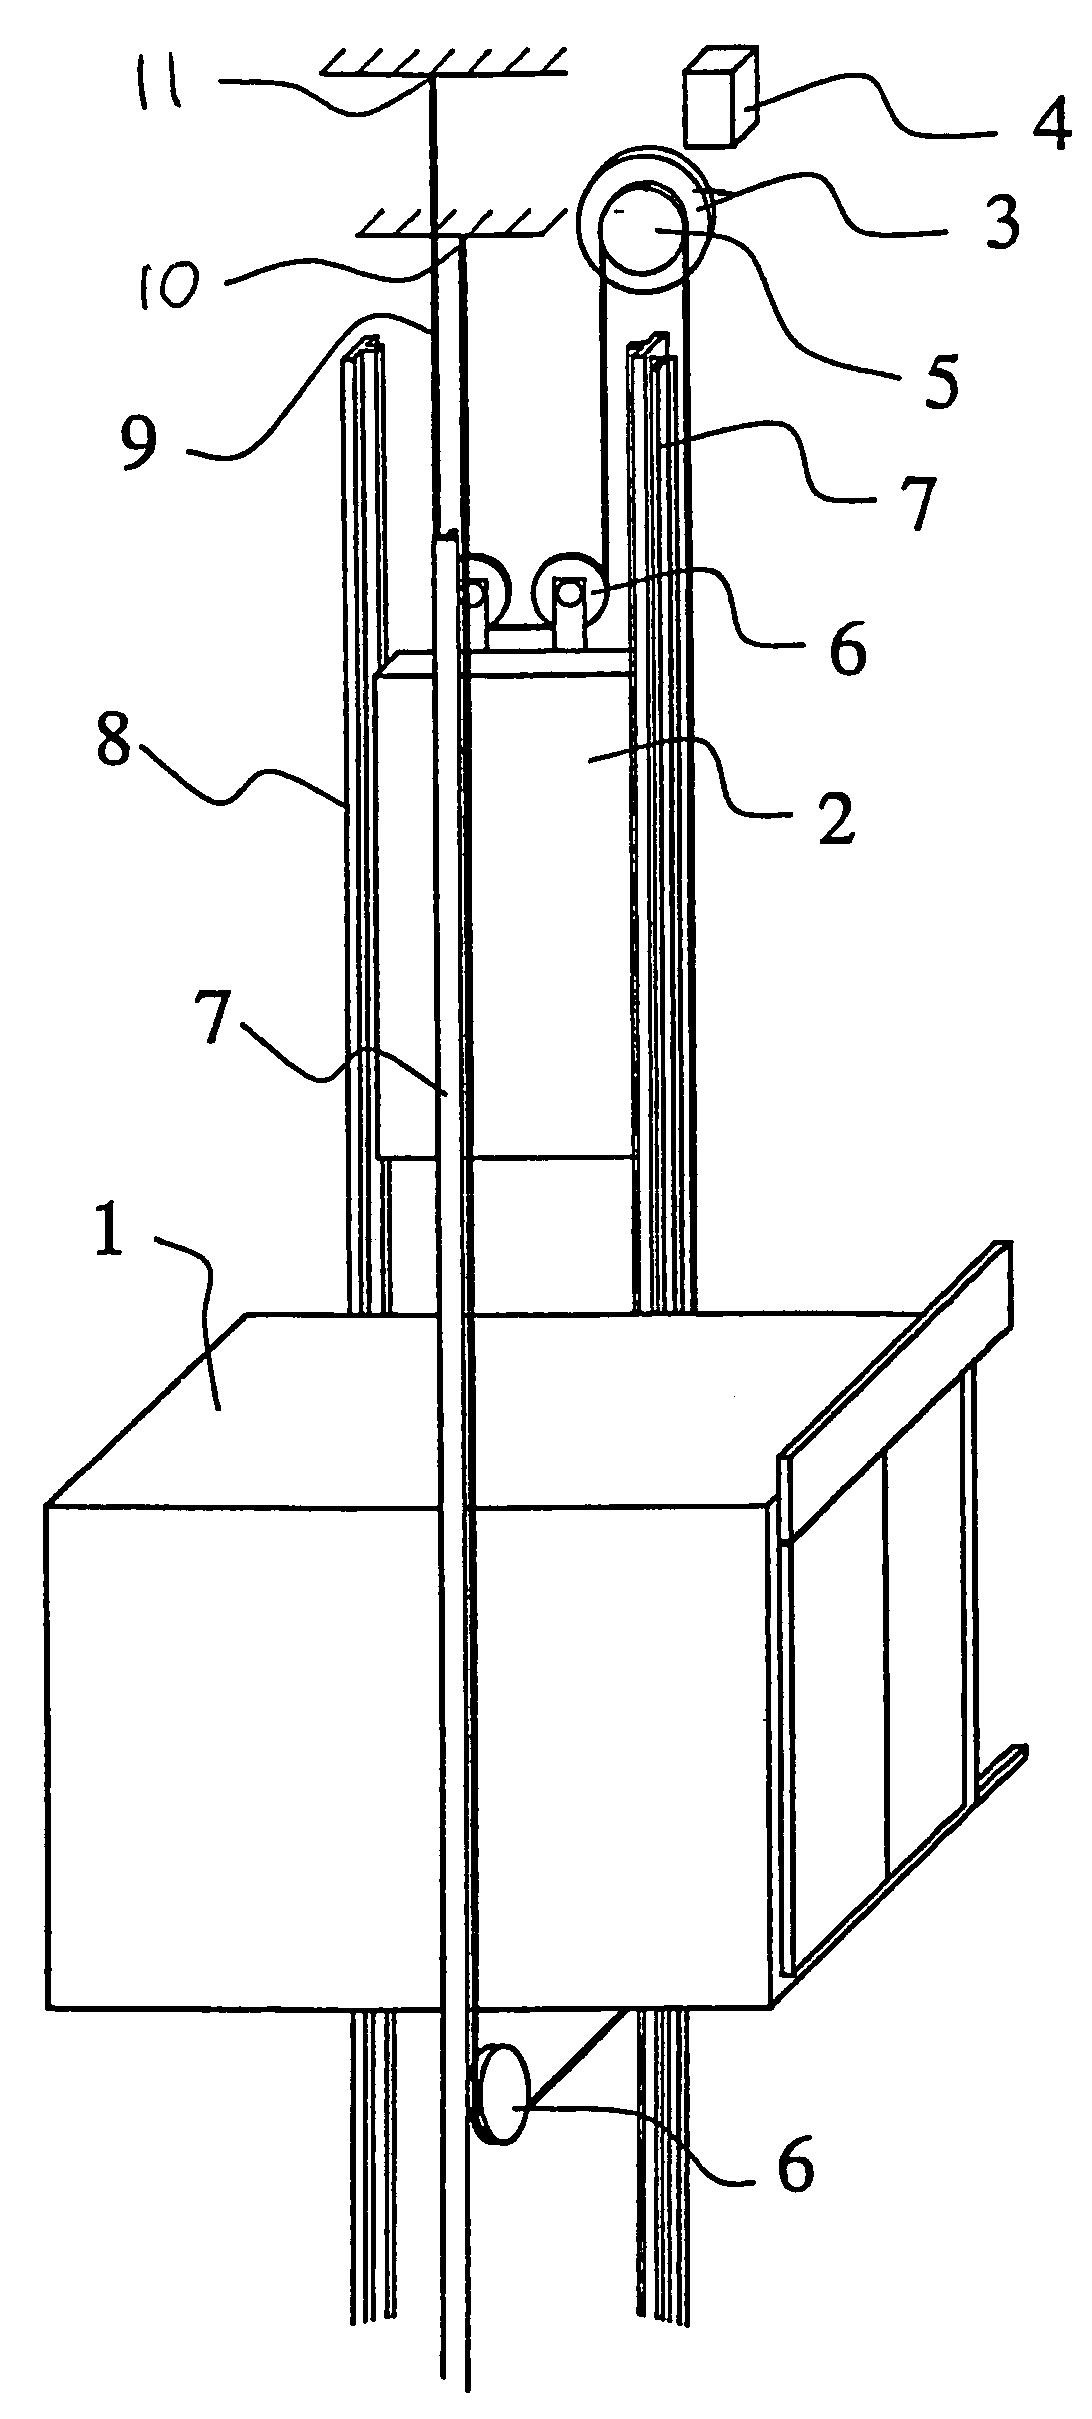 Method for ensuring and measuring the internal tension of an elevator hoisting rope, and elevator permitting the use of said method